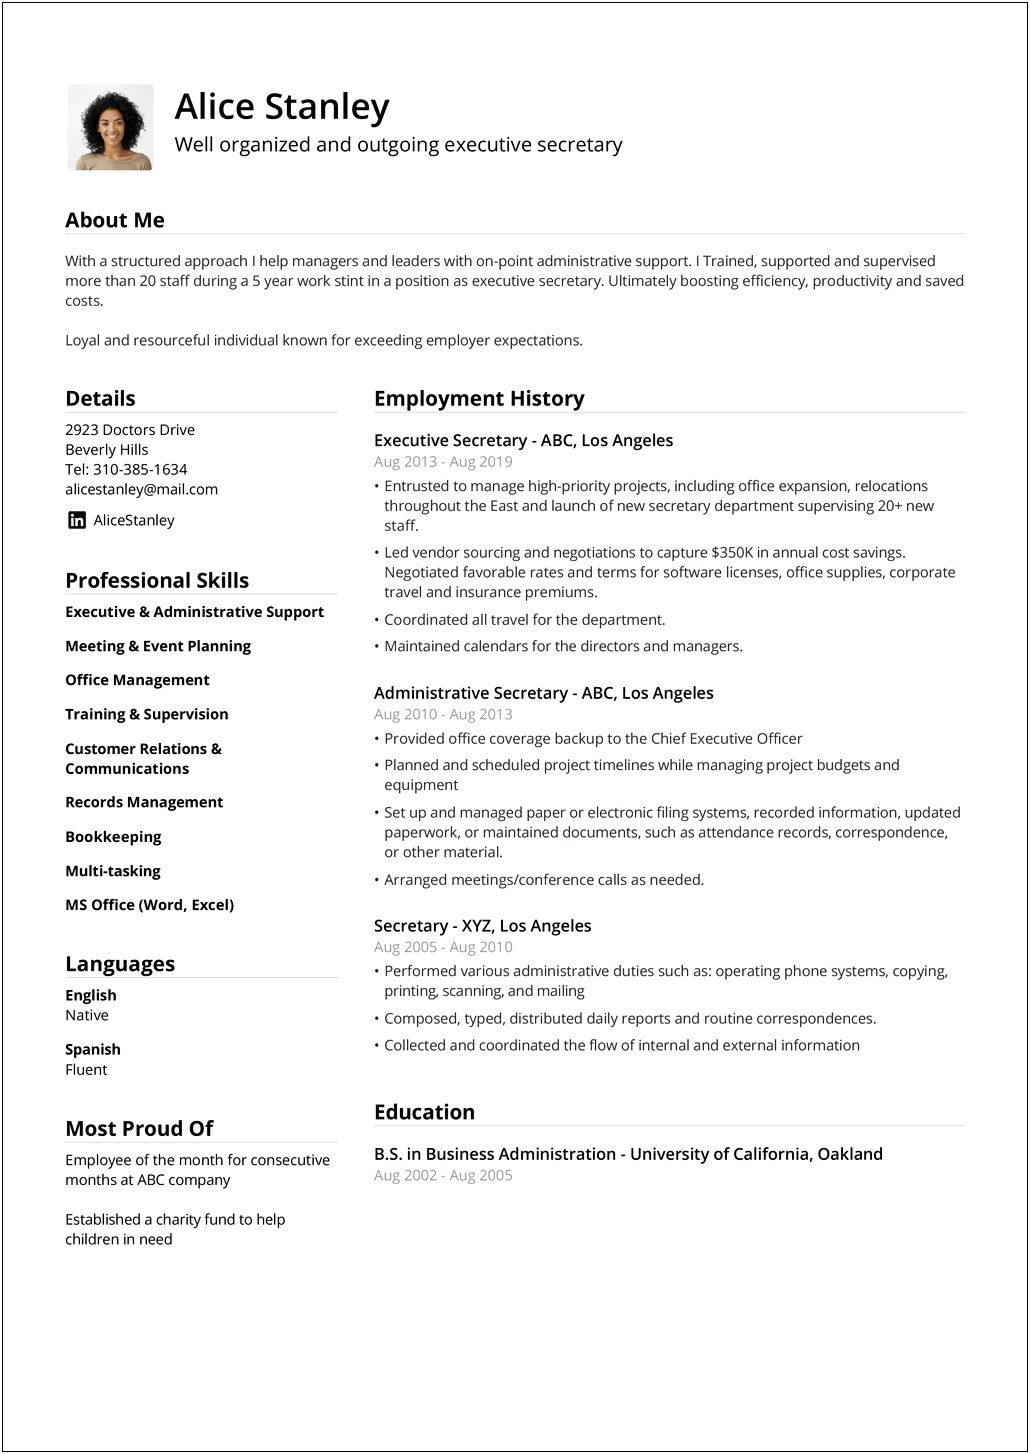 African American Online Resume And Cover Letter Writers